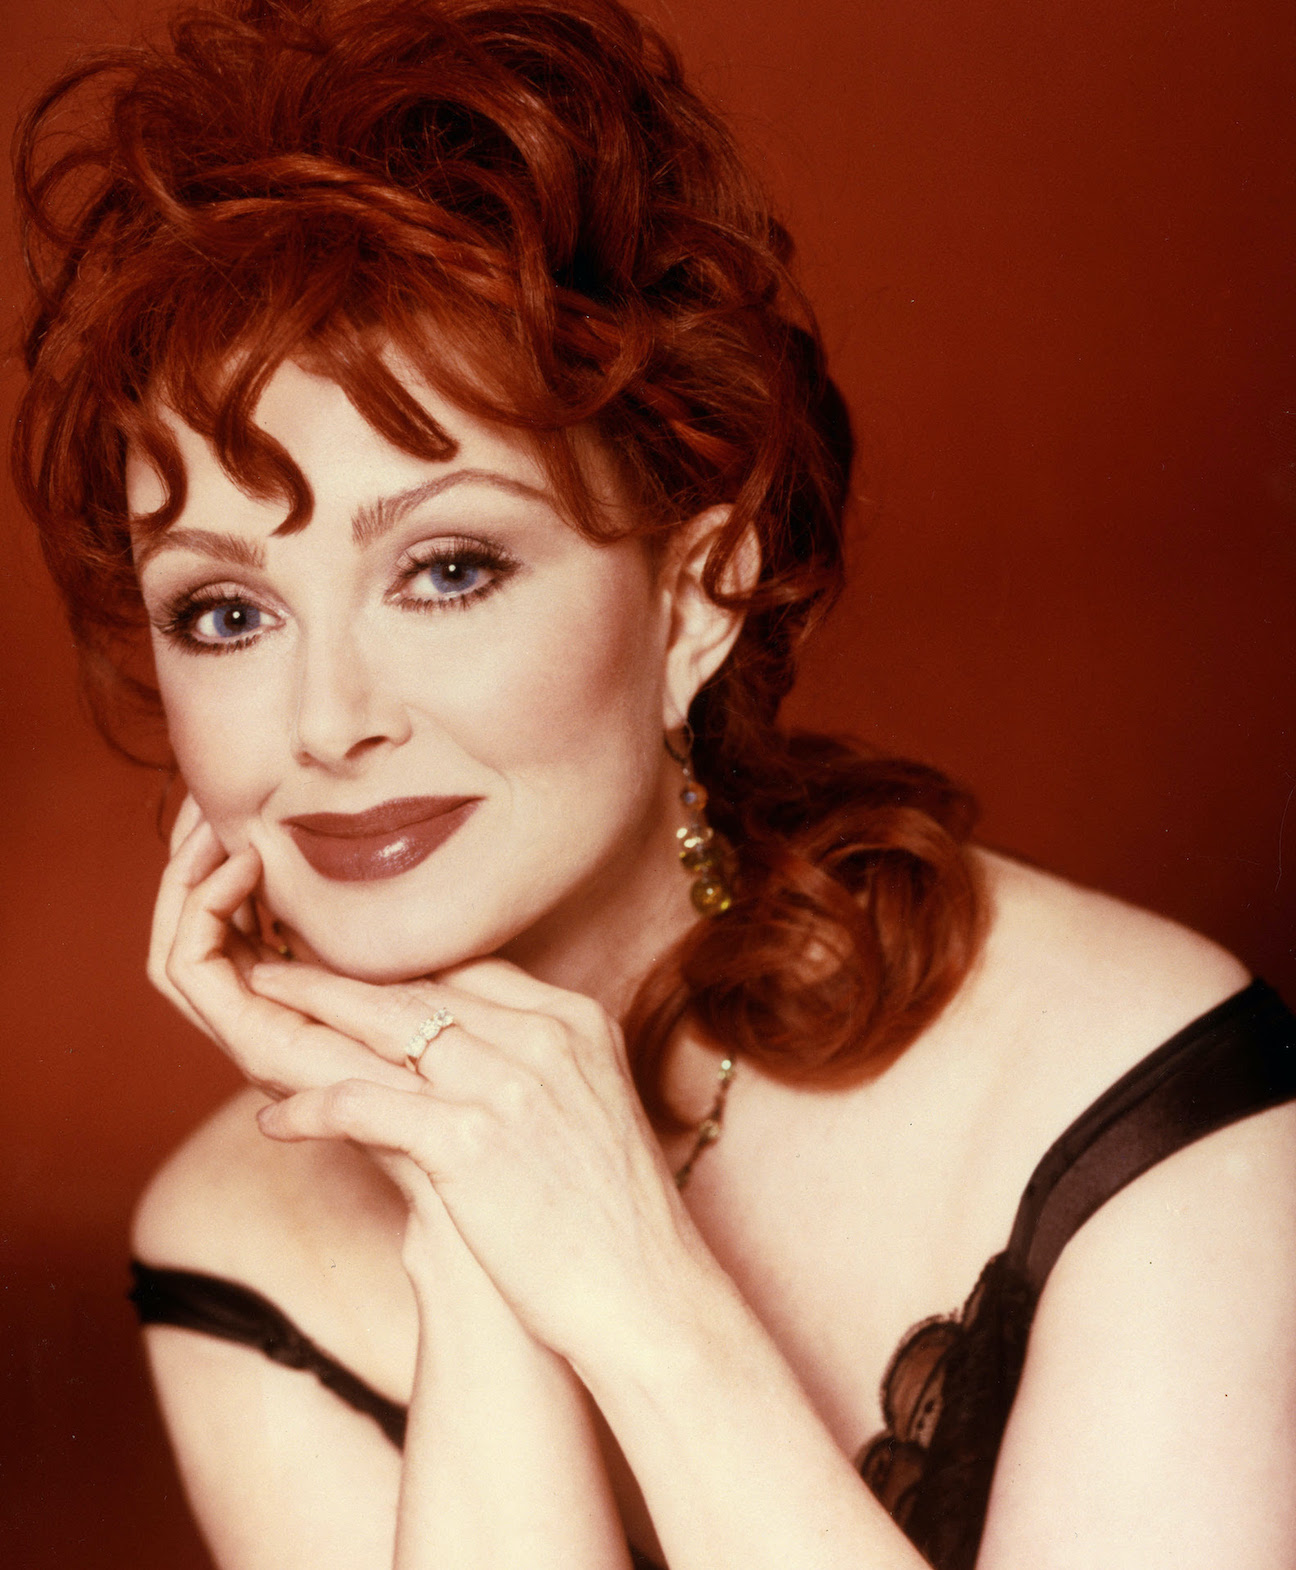 Naomi Judd (Photo credit: Courtesy of the Country Music Hall of Fame and Museum)